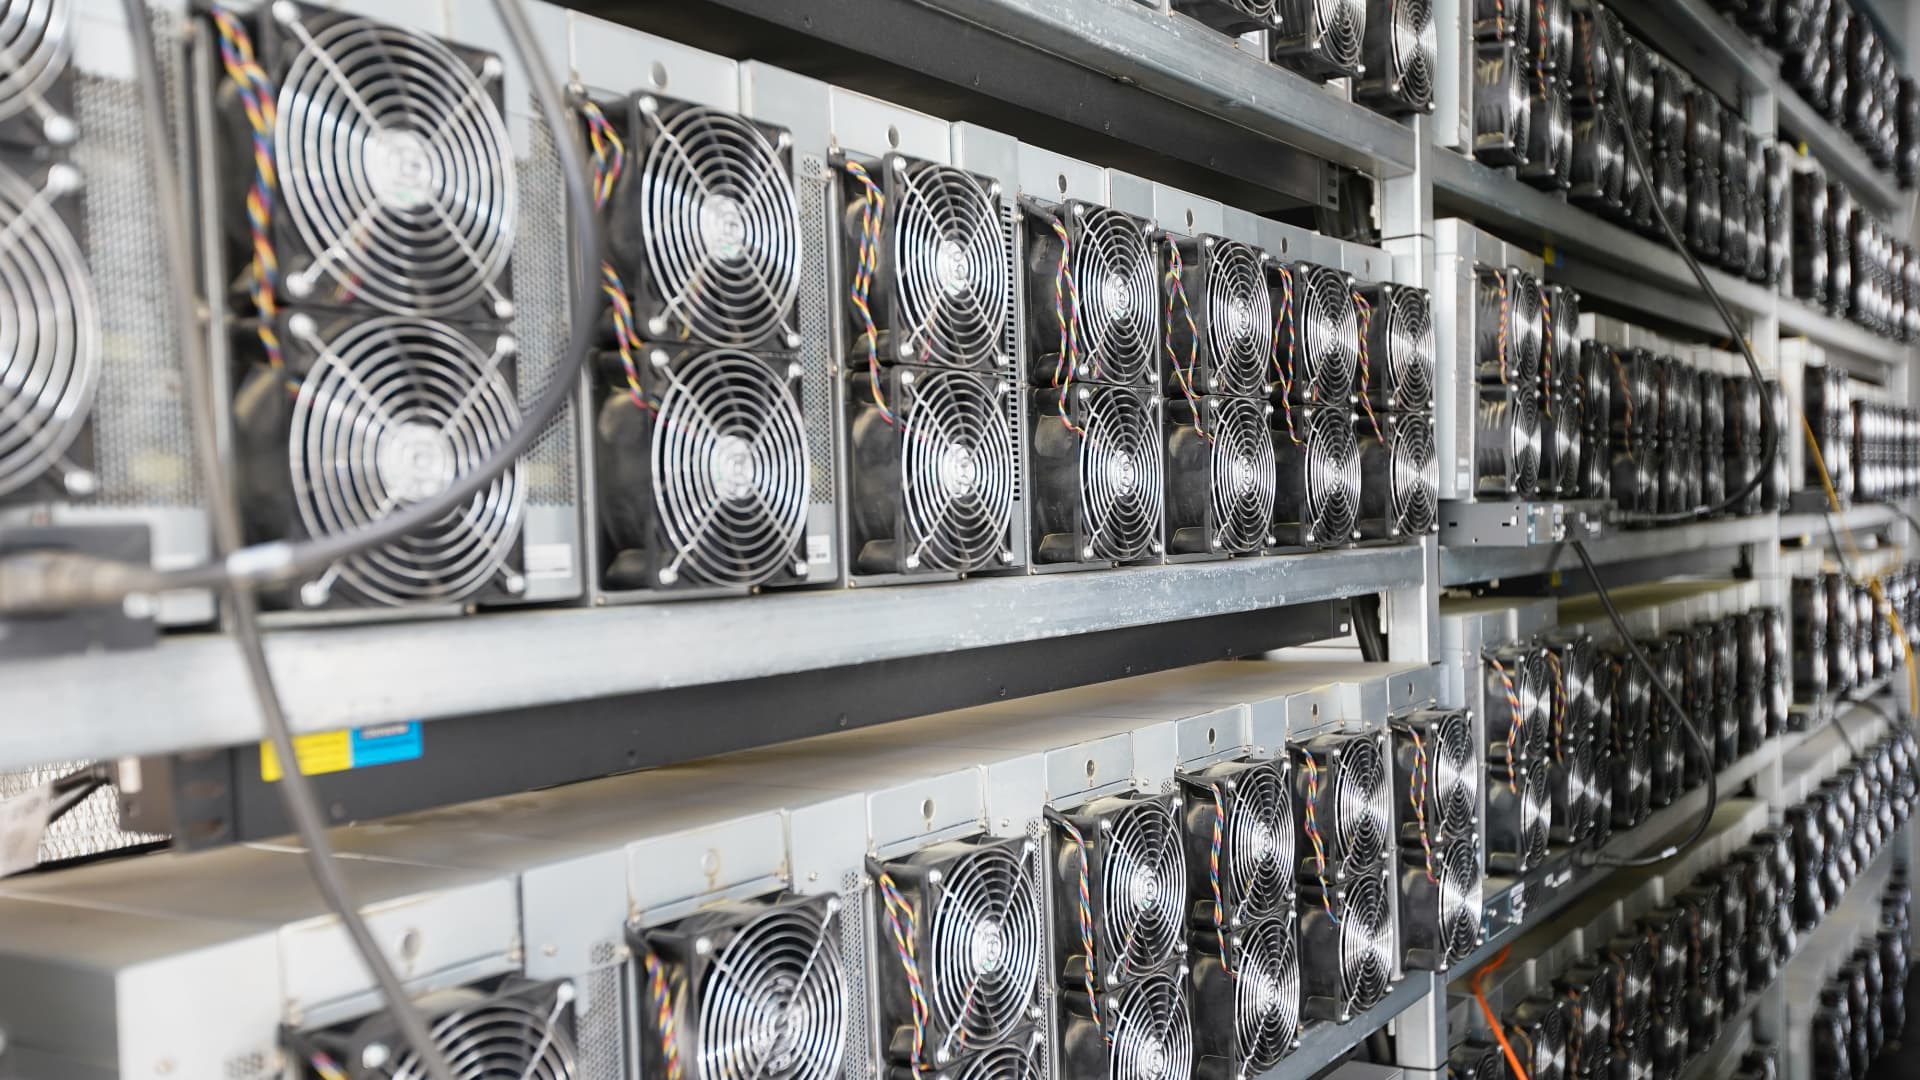 CleanSpark jumps on plans to buy four bitcoin mining facilities ahead of the halving 